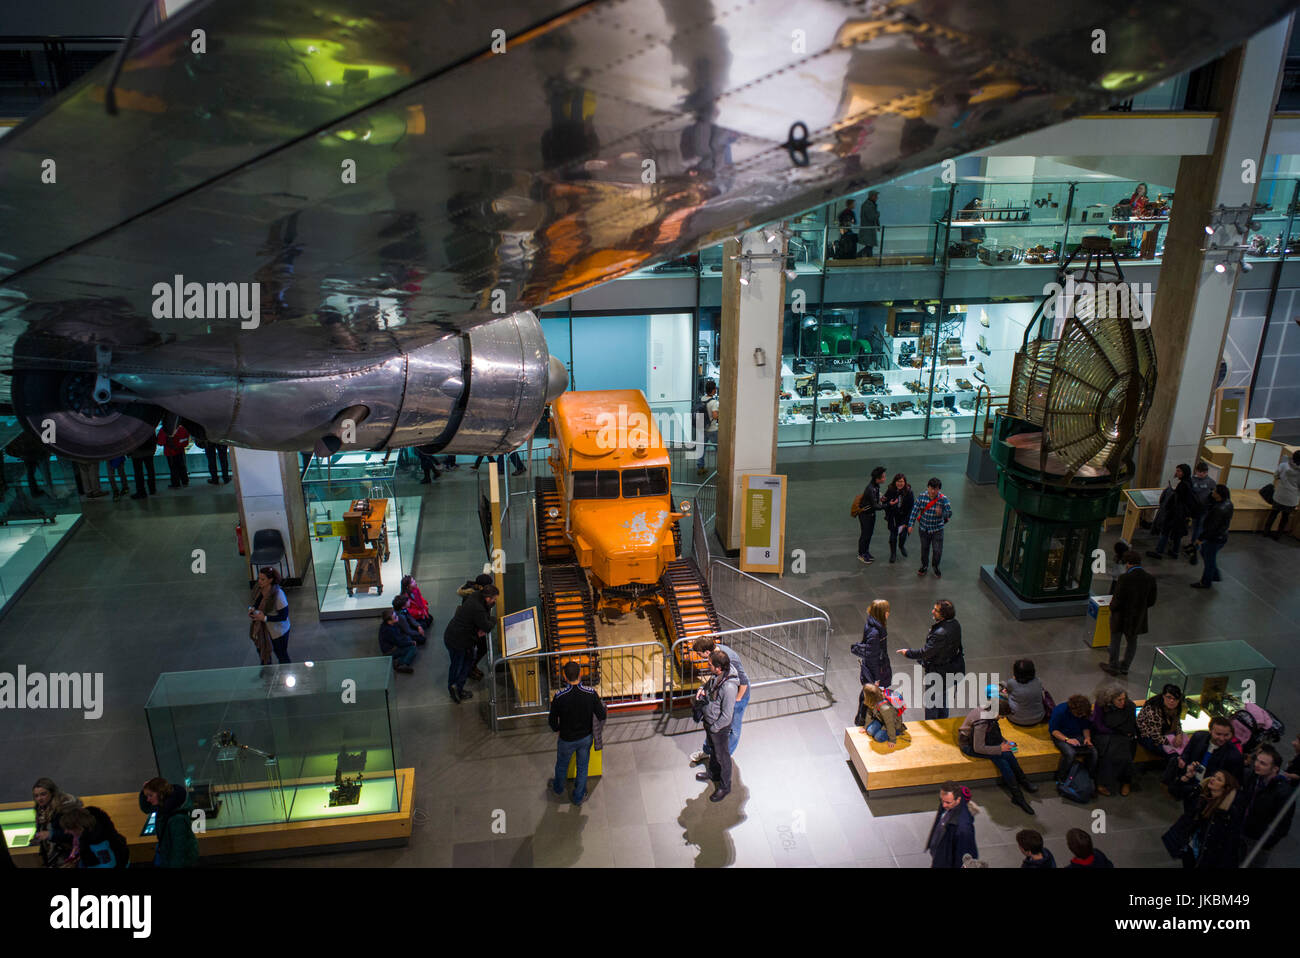 England, London, South Kensington, Science Museum, aircraft in transportation hall Stock Photo